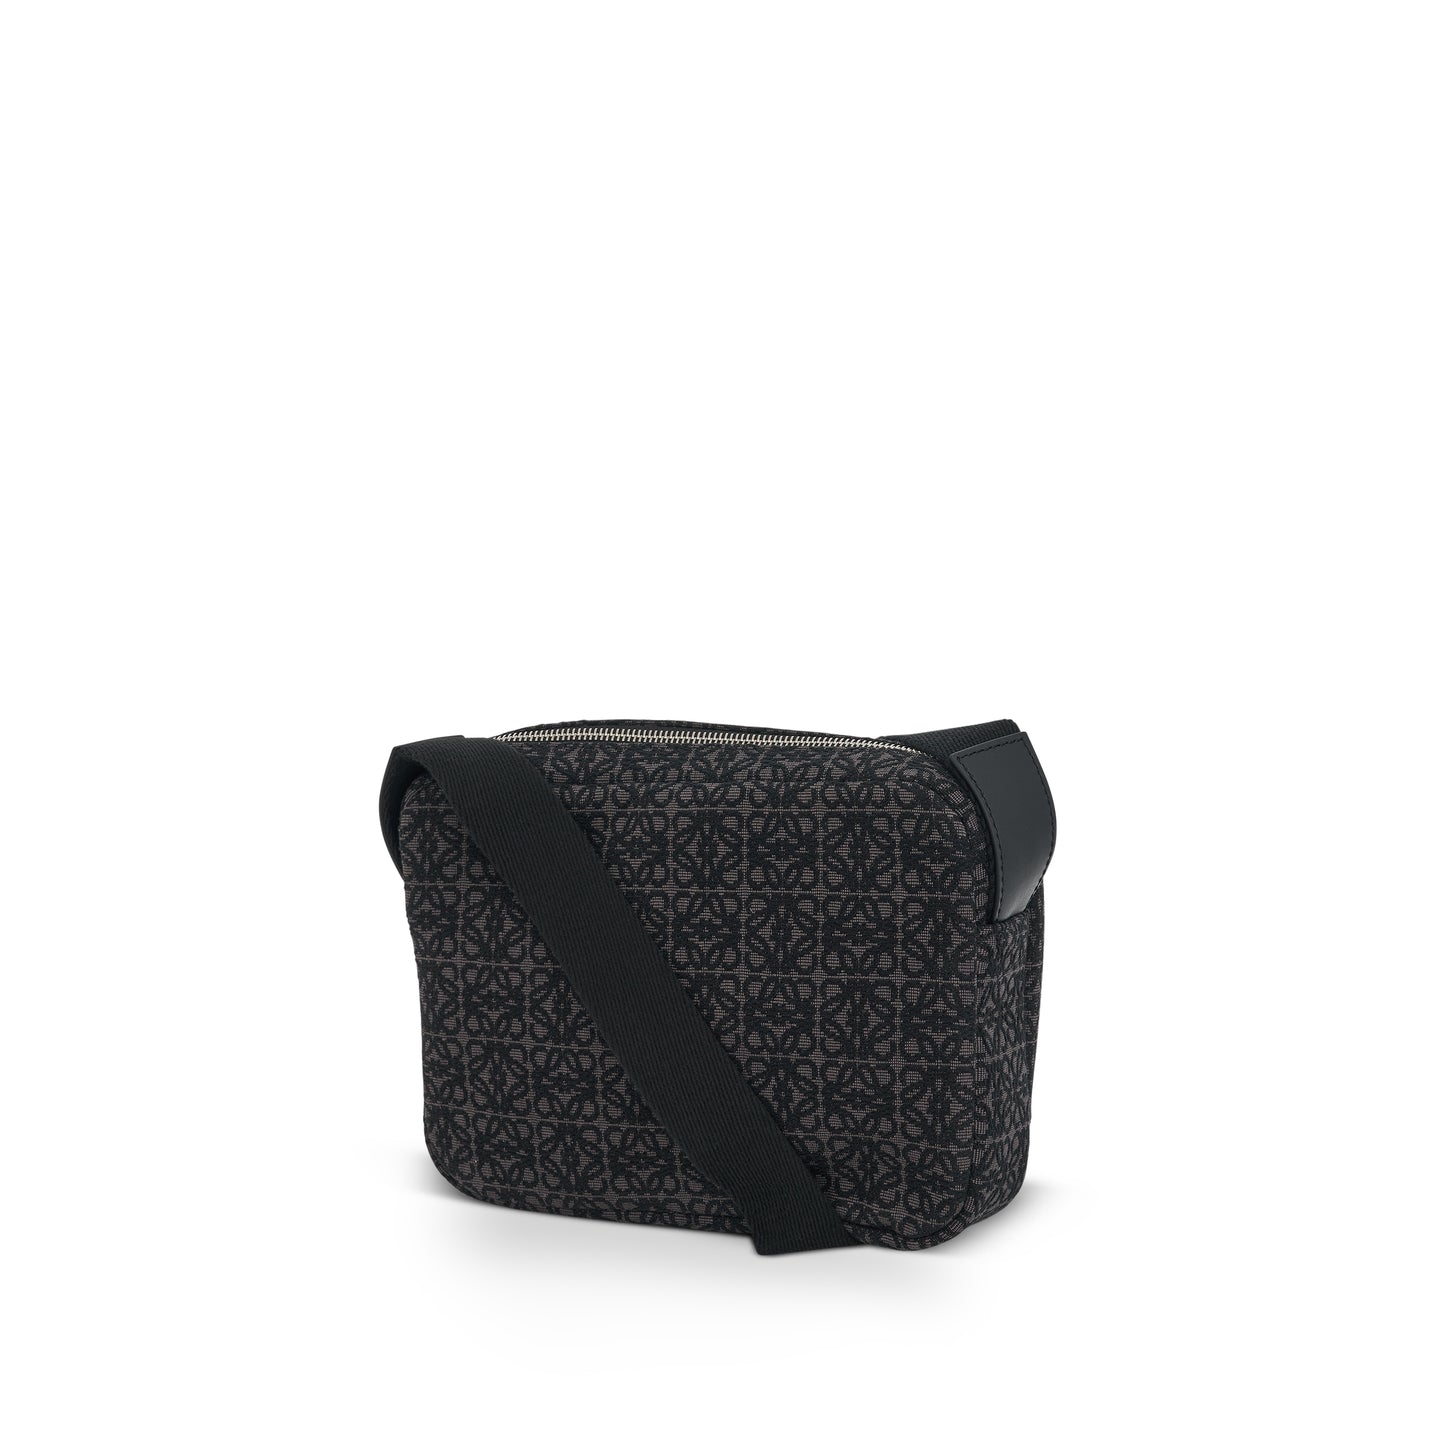 XS Military Messenger Bag in Anagram Jacquard and Calfskin in Anthracite